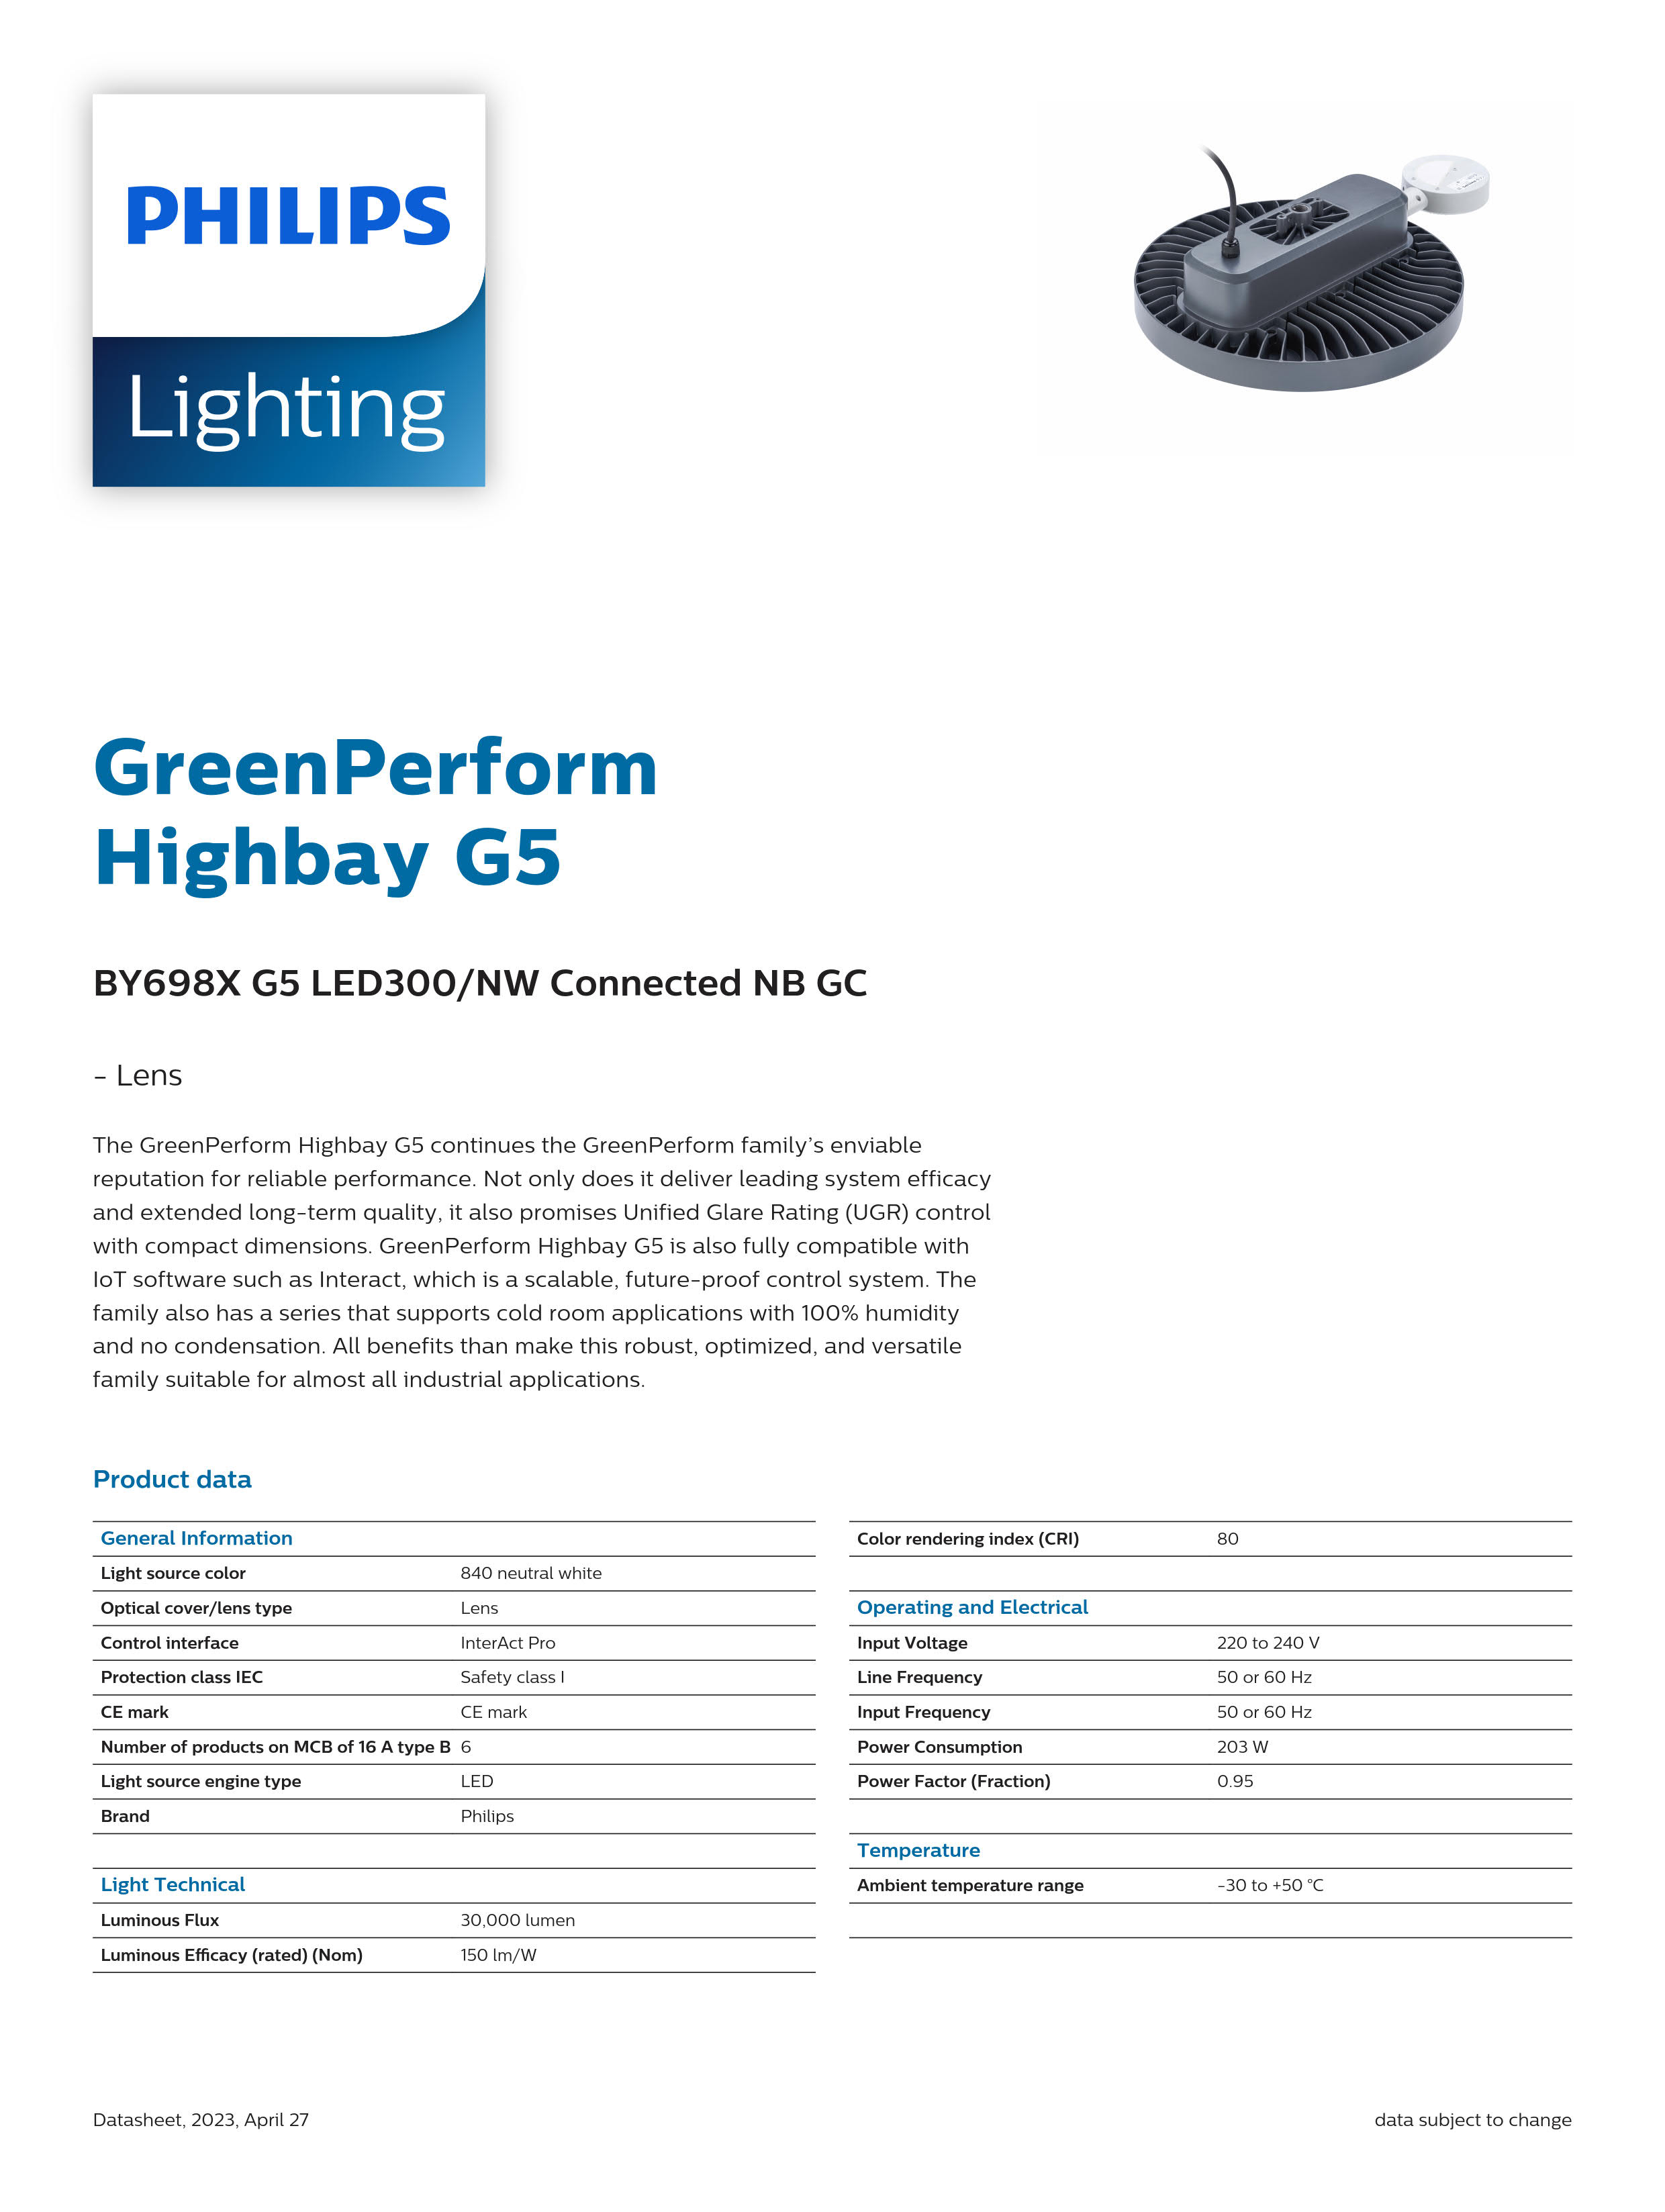 PHILIPS Highbay BY698X G5 LED300/NW Connected NB GC 911401525291